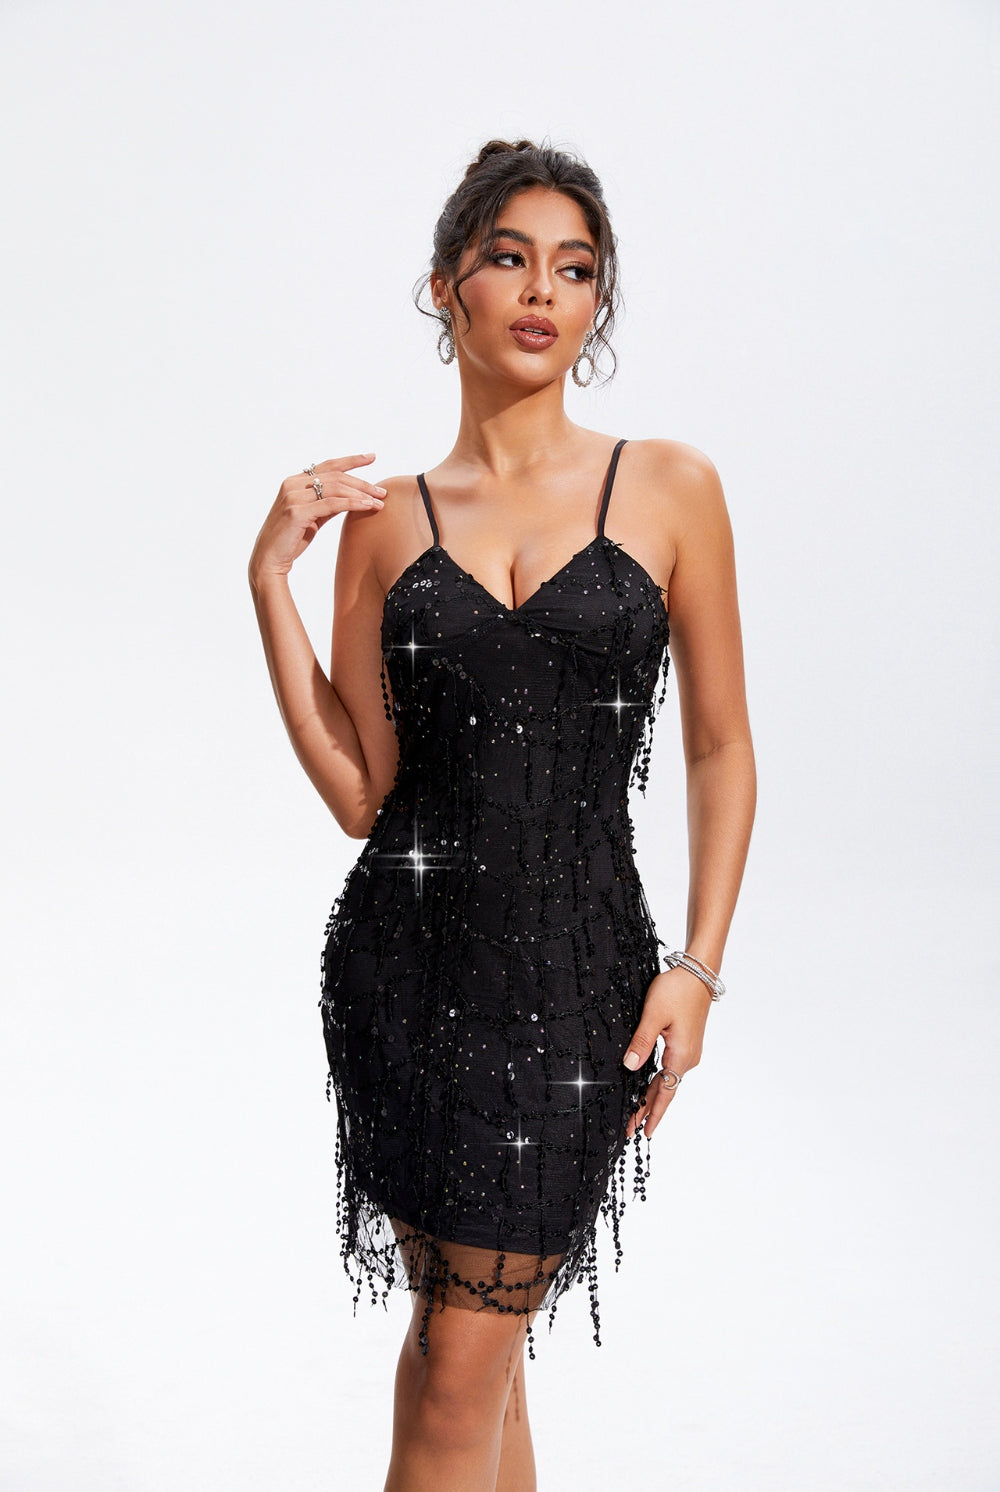 A woman in a black beaded cami dress with fringe detailing, exuding sophistication and poise.